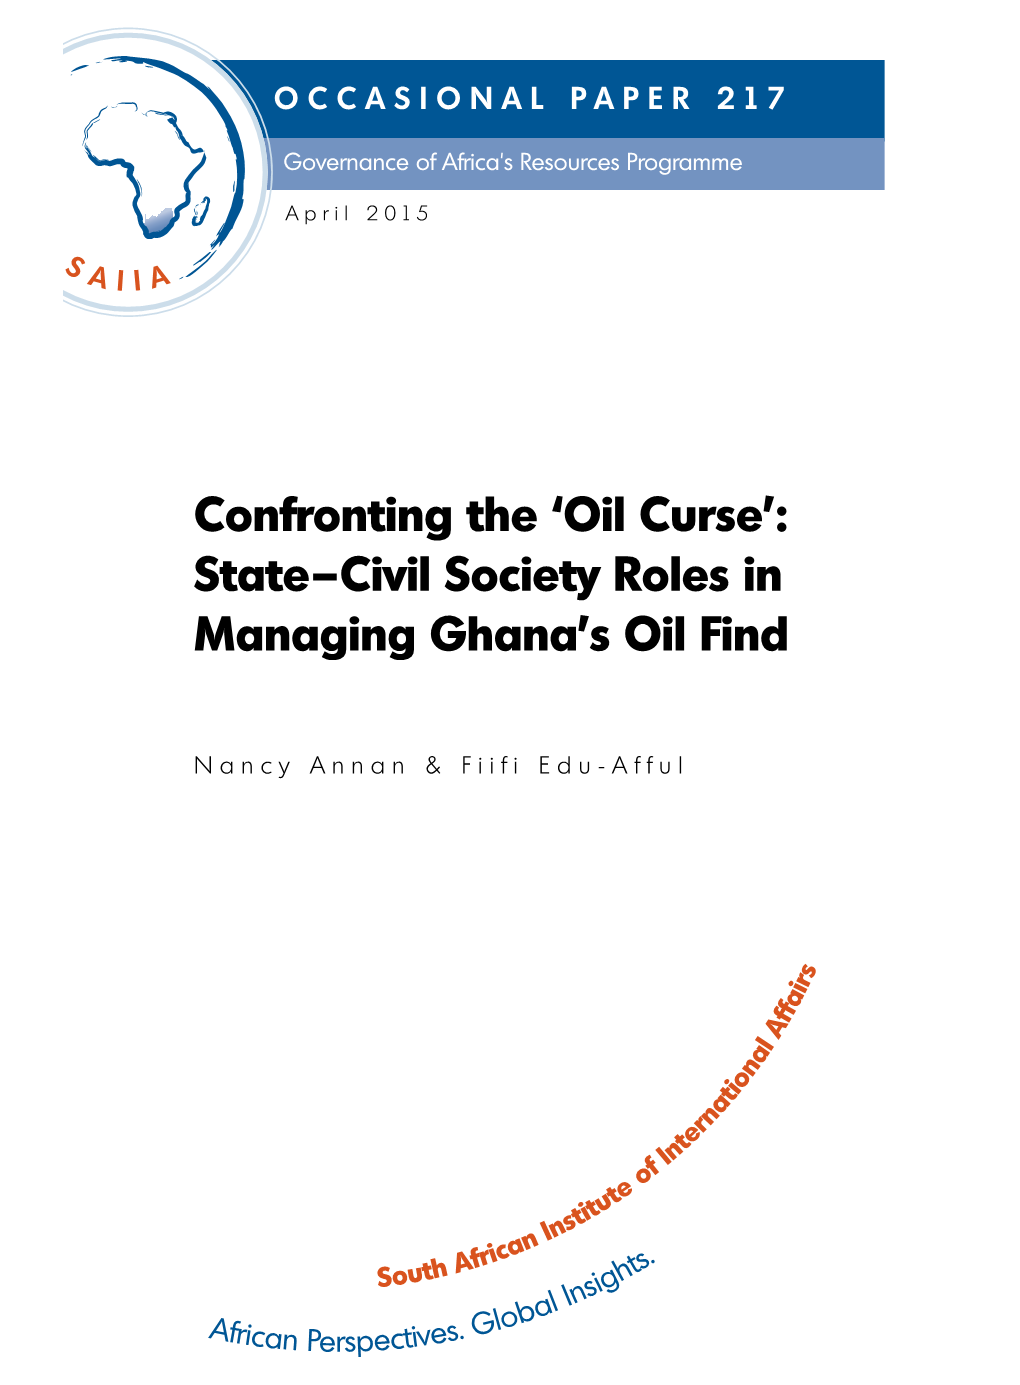 State–Civil Society Roles in Managing Ghana's Oil Find